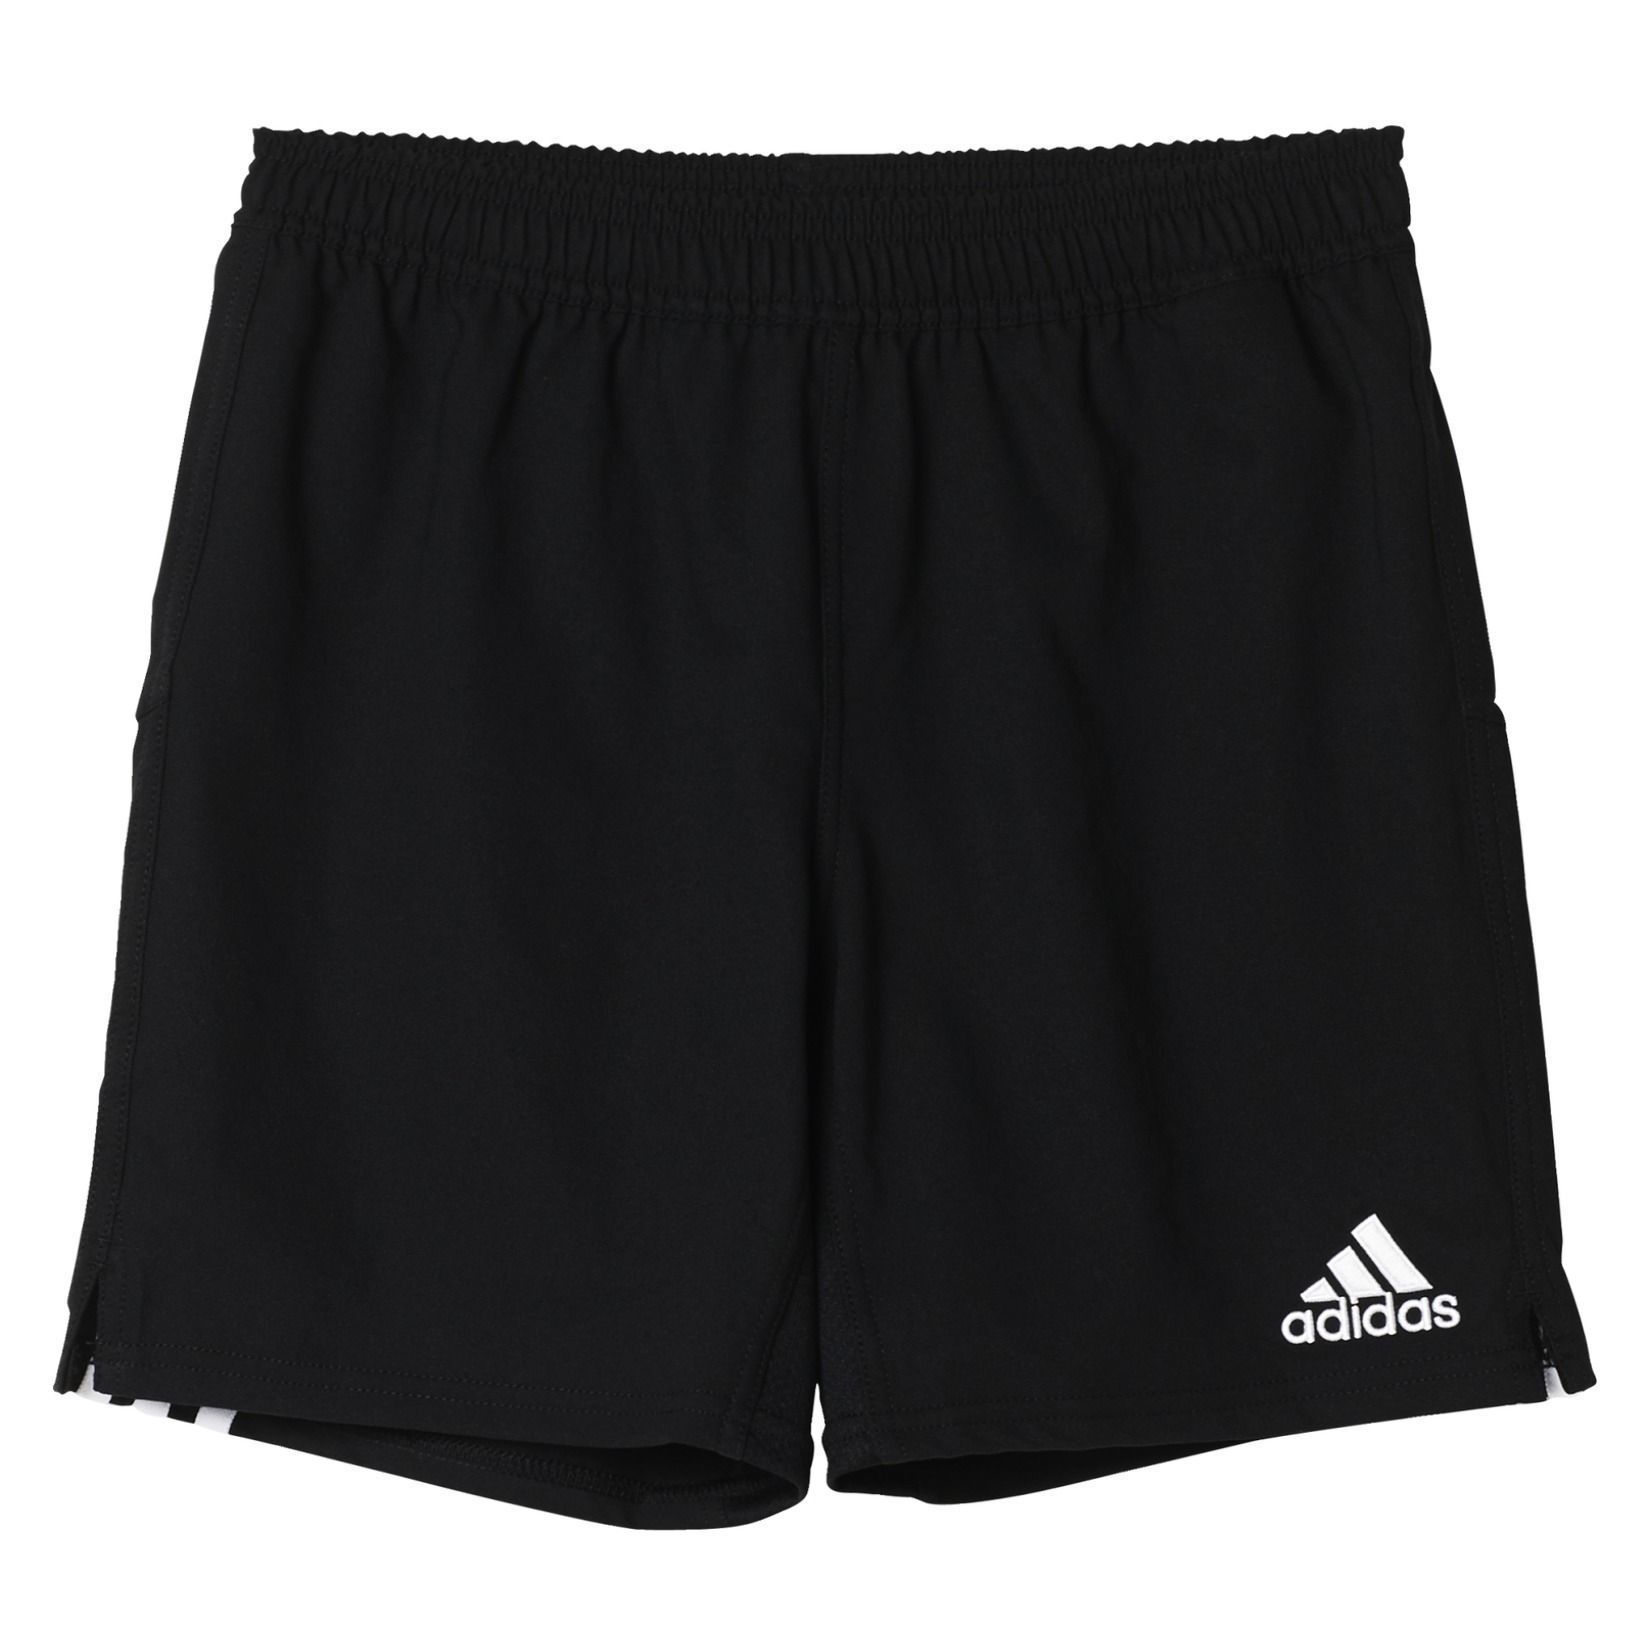 Adidas-LP Kids Classic 3s Rugby Short